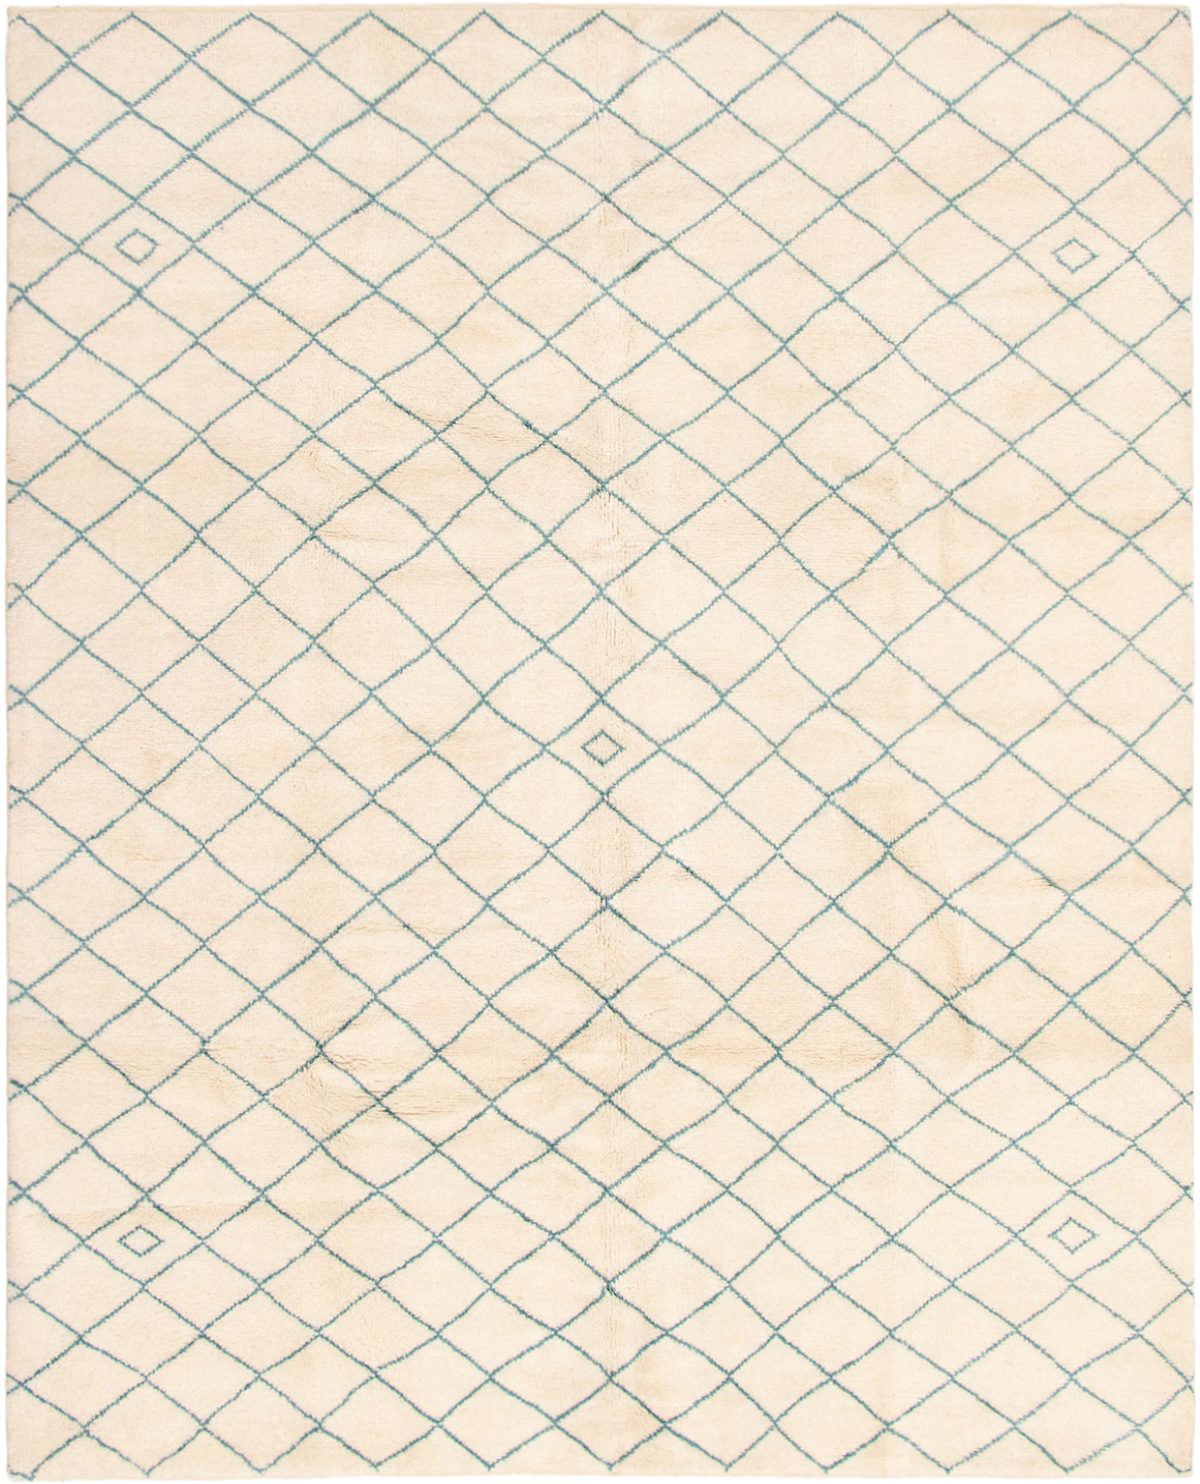 Hand-knotted Arlequin Cream Wool Rug 8'1" x 10'2" Size: 8'1" x 10'2"  